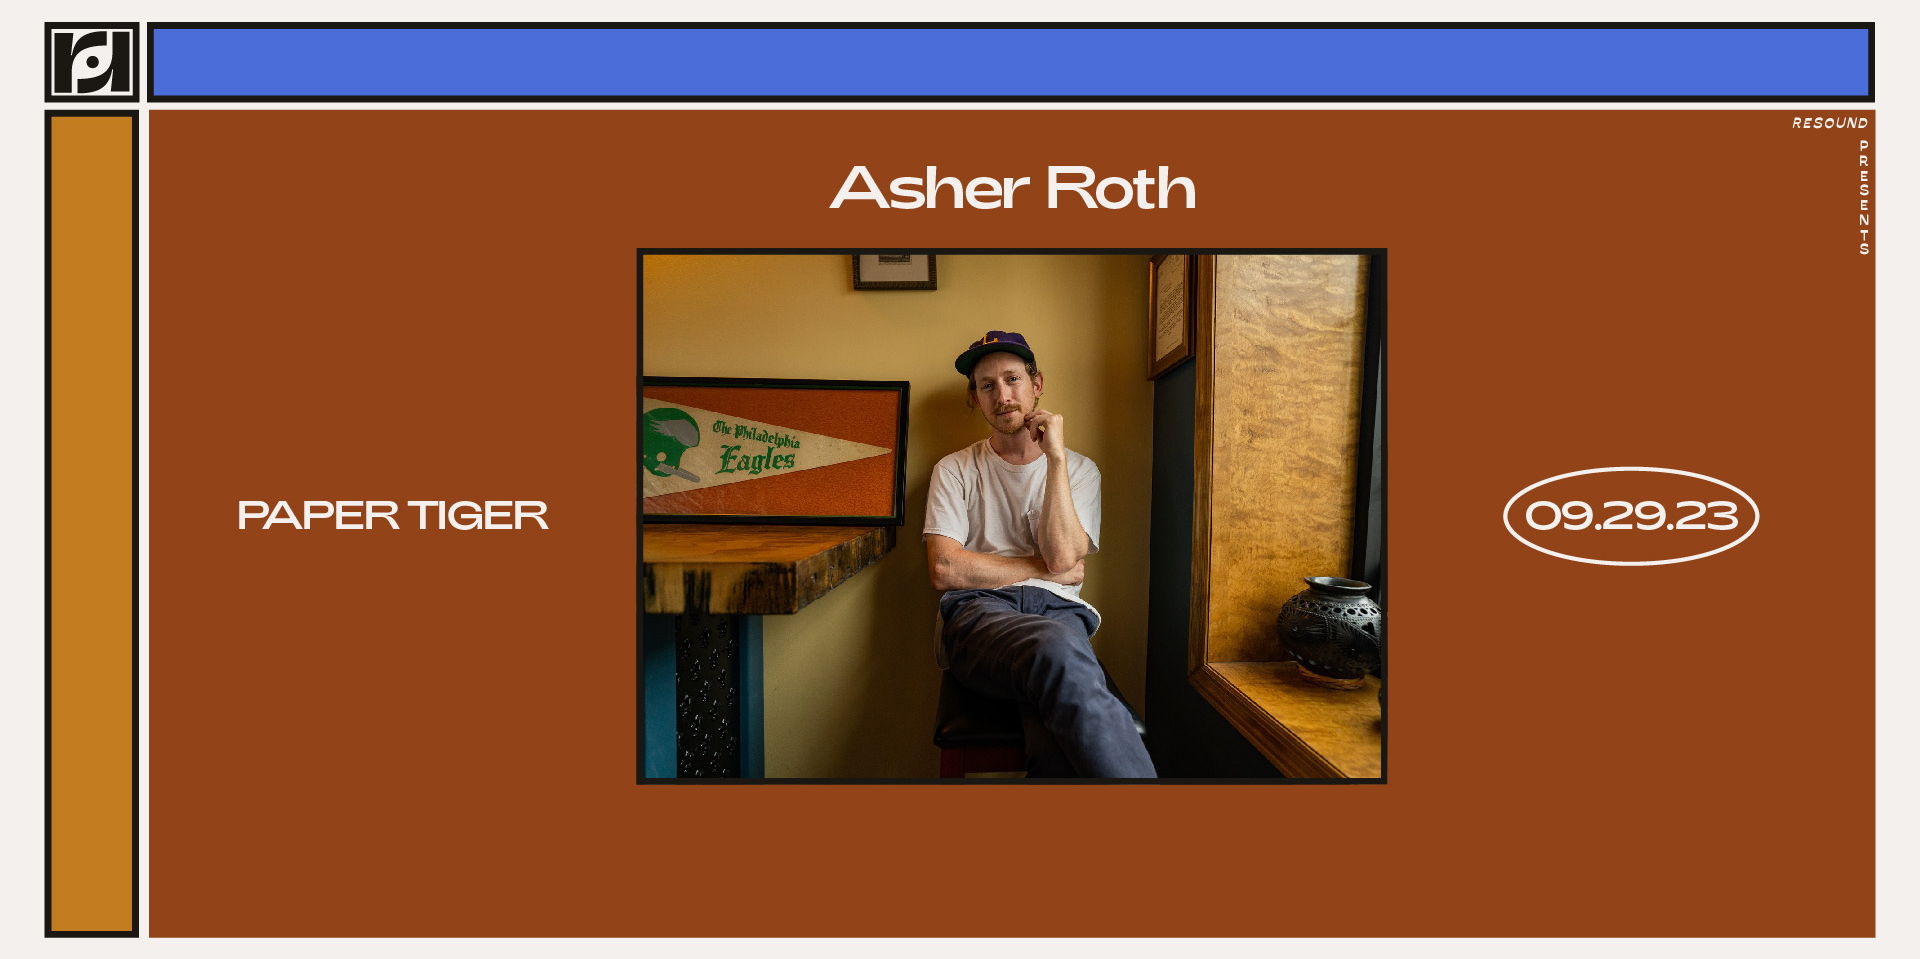 Asher Roth 9/29 promotional image